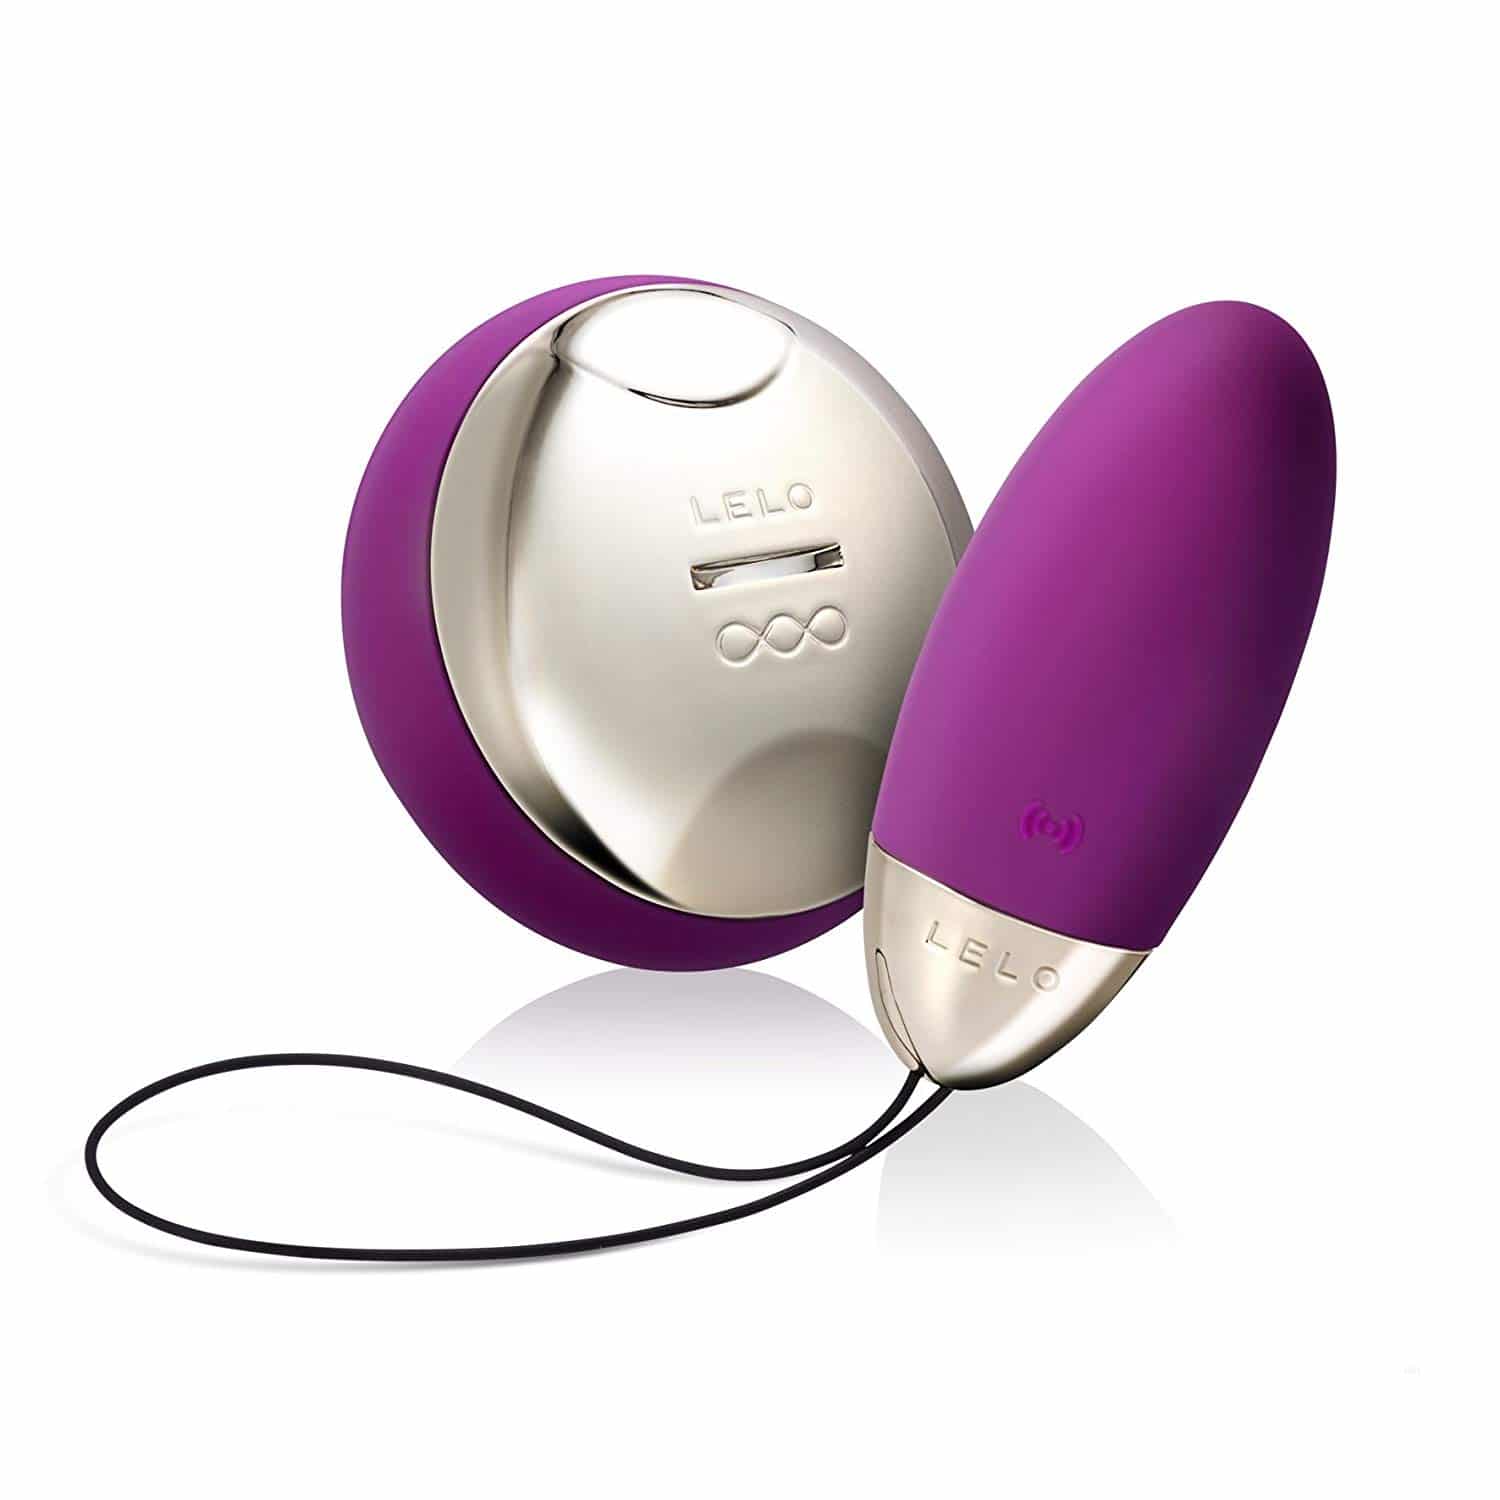 top rated bullet vibrator list 2019